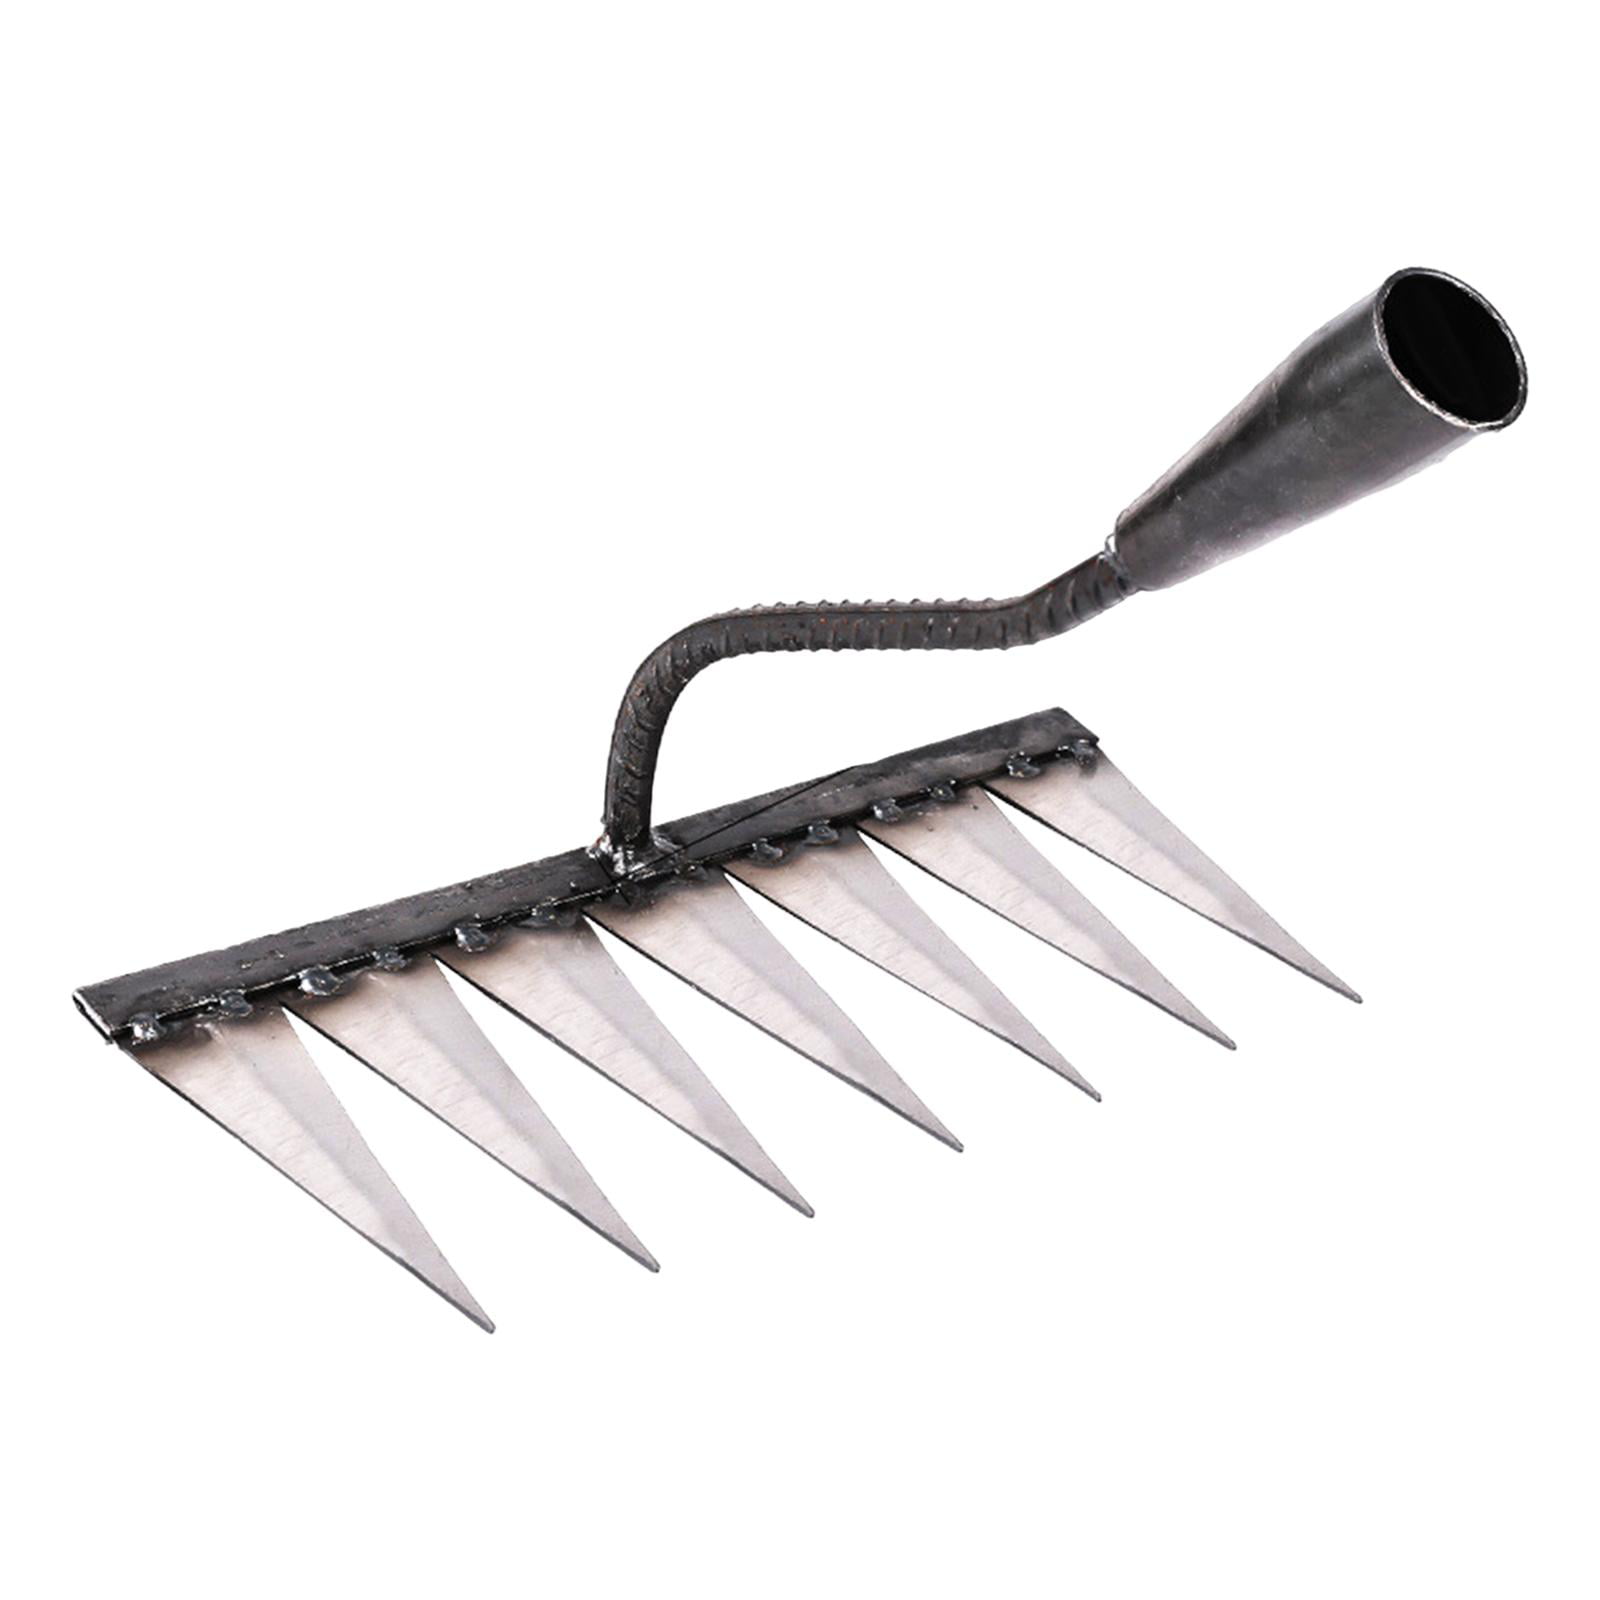 Niyanta 3 Prong Gardening Tool | Rust Proof Rake Designer Garden Tool |  Tool for Mixing or Tilling Compost and Garden Soil | Strong Sturdy Bold  Look